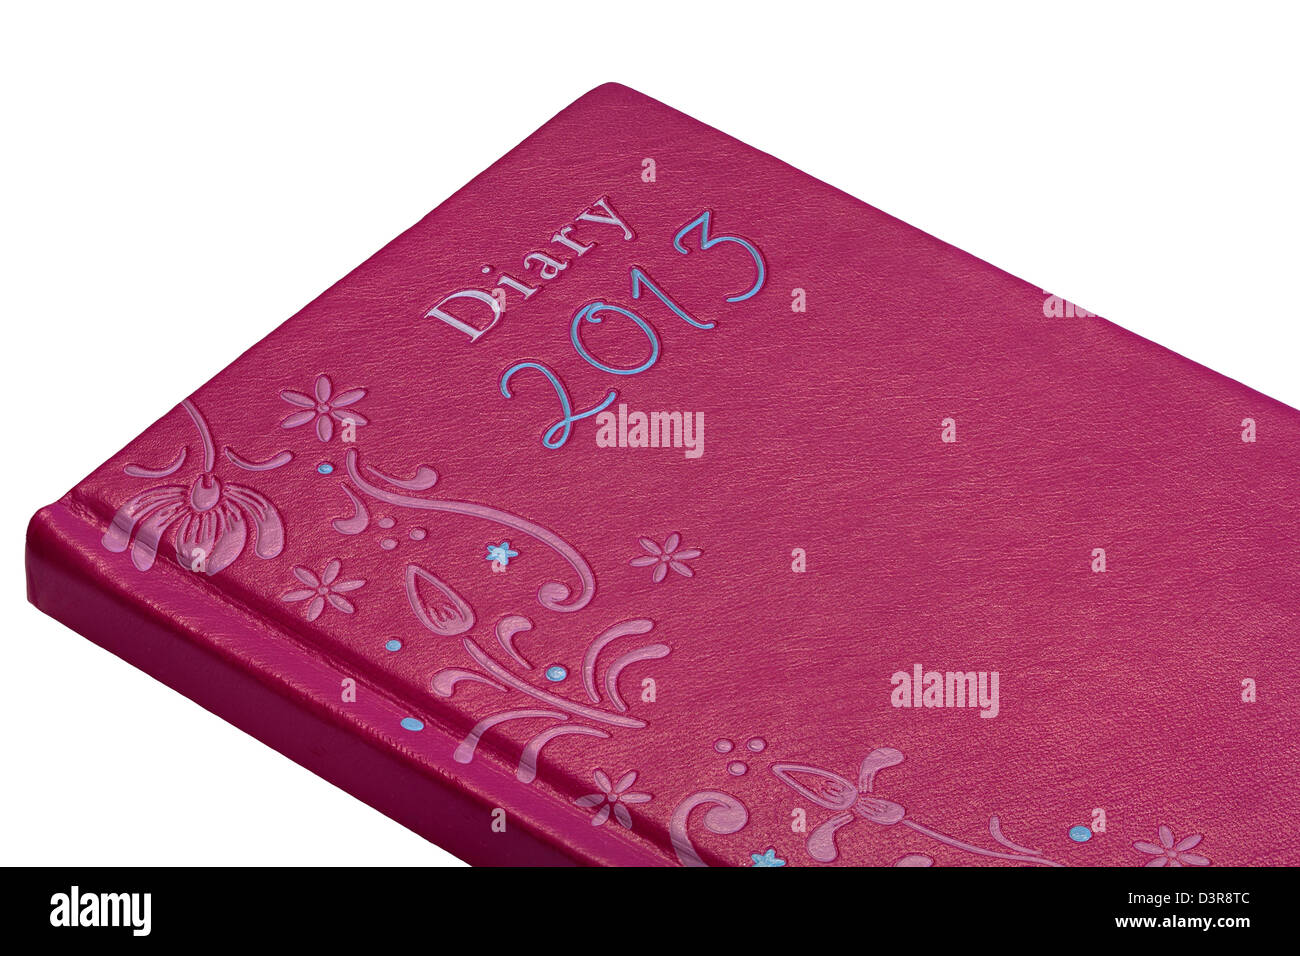 Red Ornate Leather Effect 2013 Diary isolated on white background Stock Photo